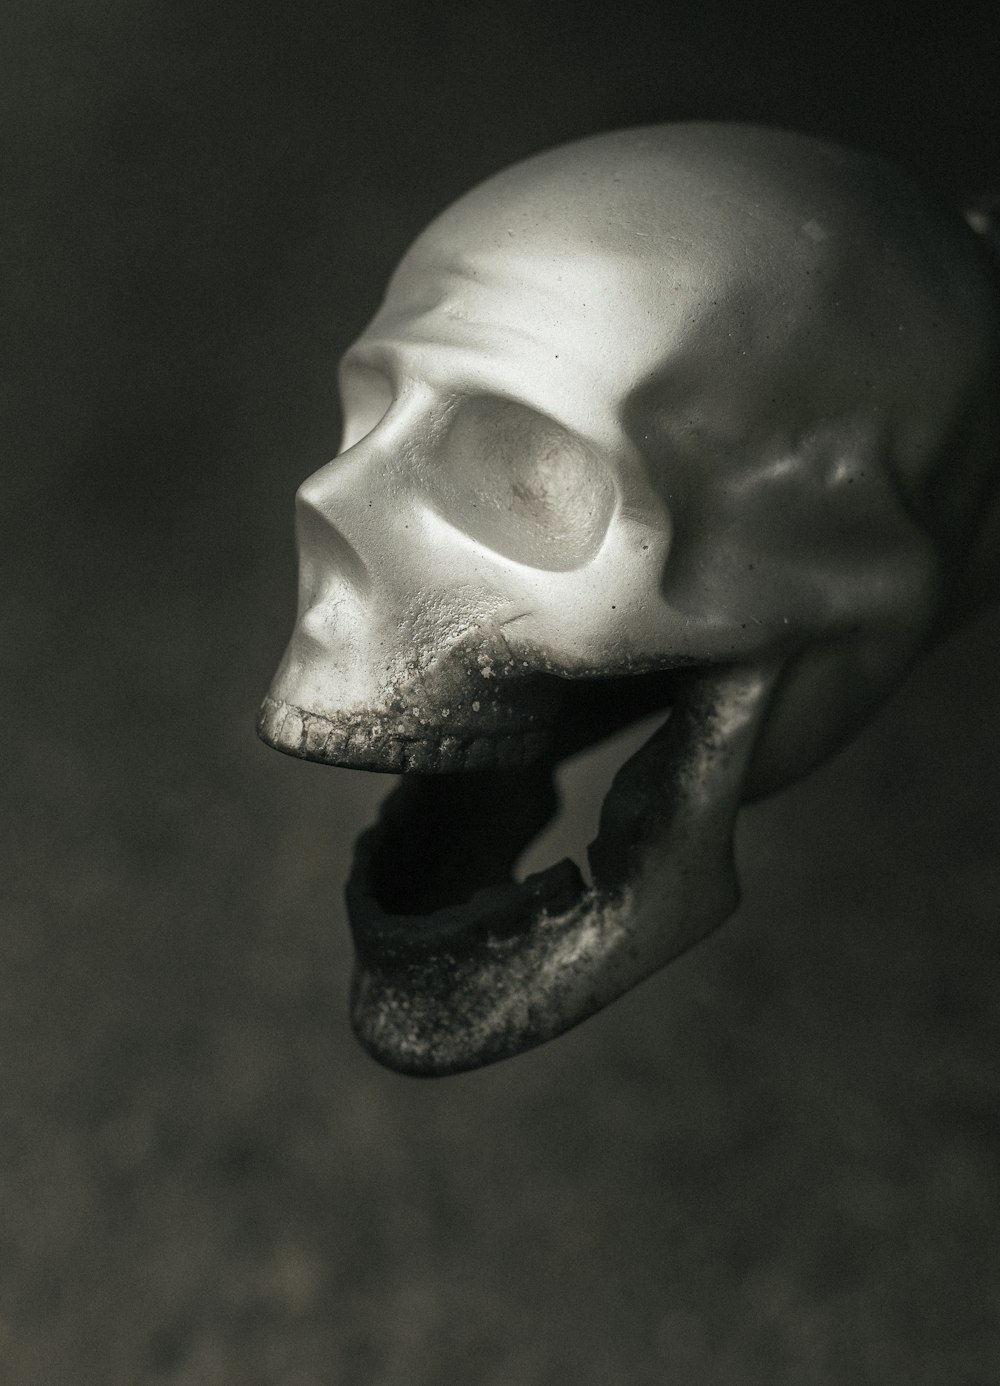 a skull with a human face